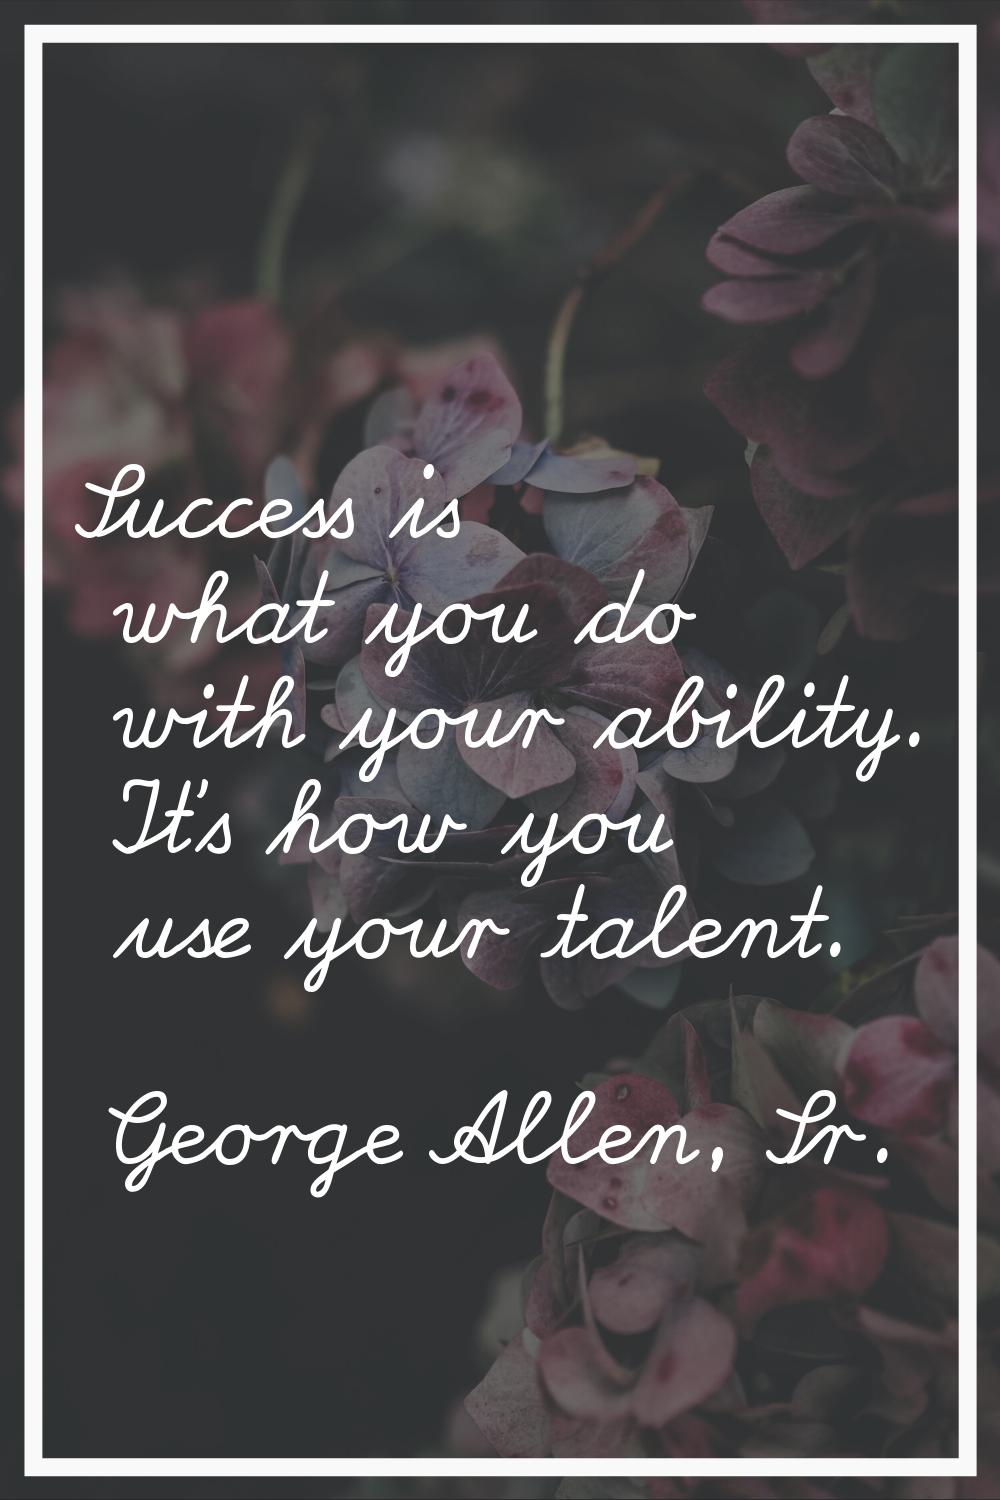 Success is what you do with your ability. It's how you use your talent.